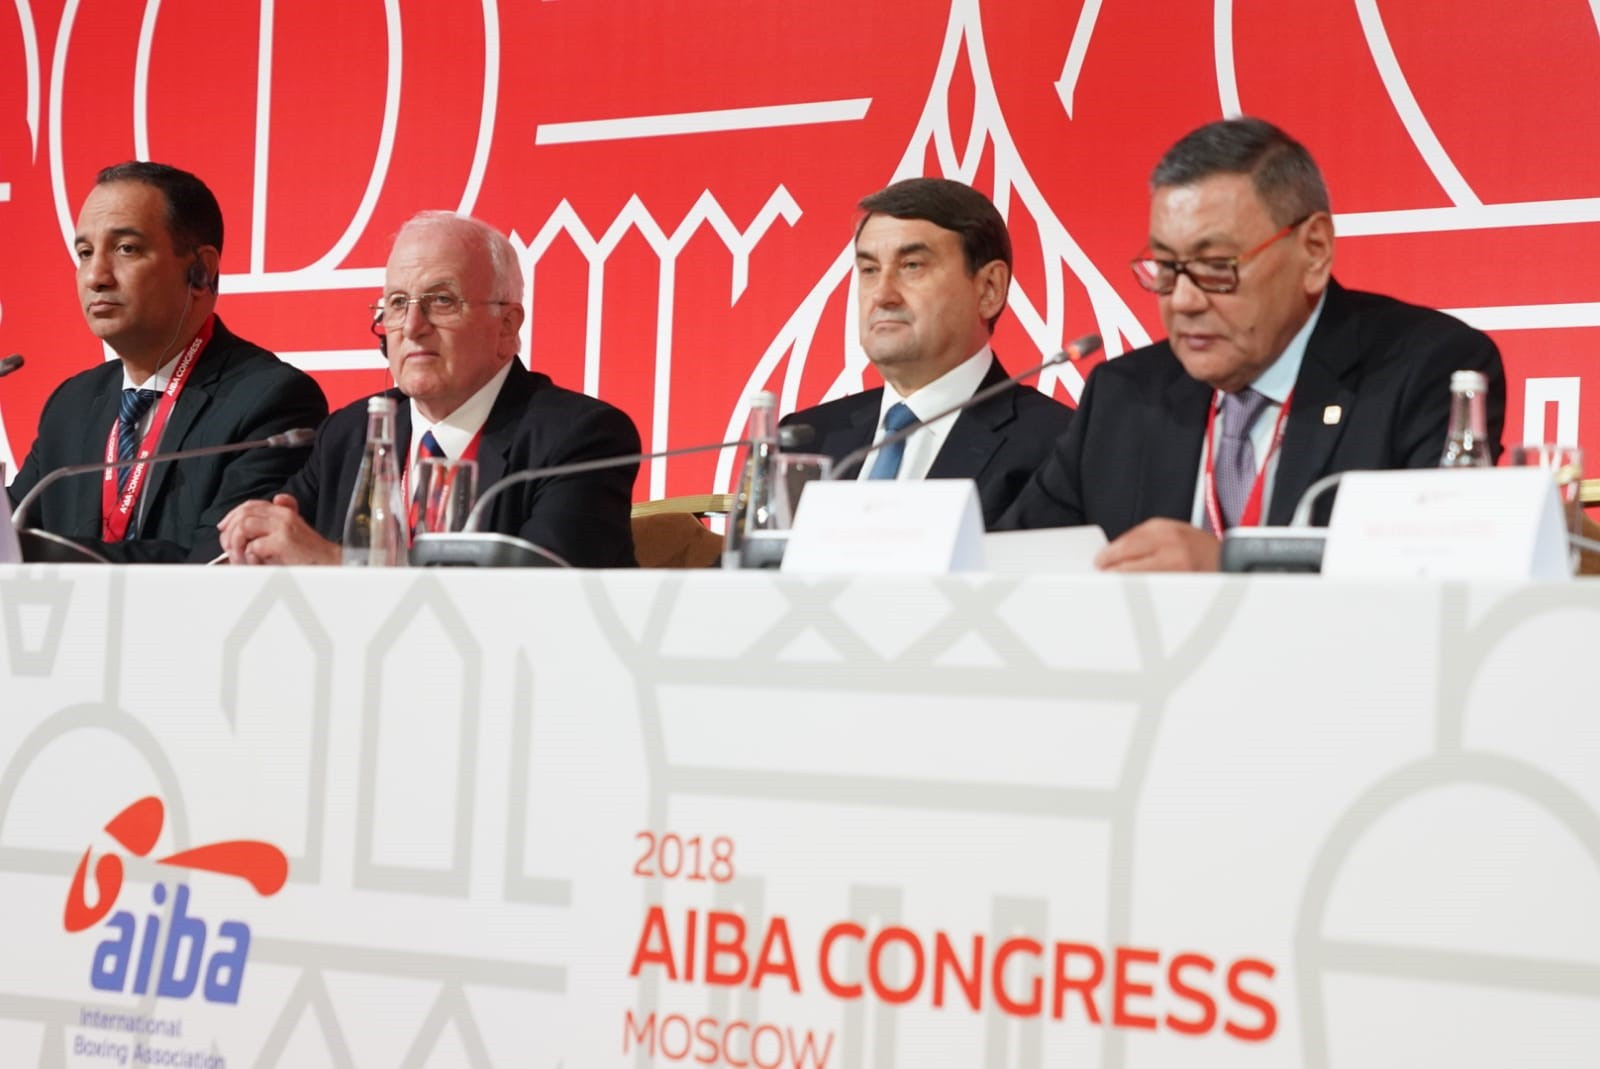 New AIBA President Gafur Rakhimov, right, has selected four additional members to add to the organisation's Executive Committee ©AIBA